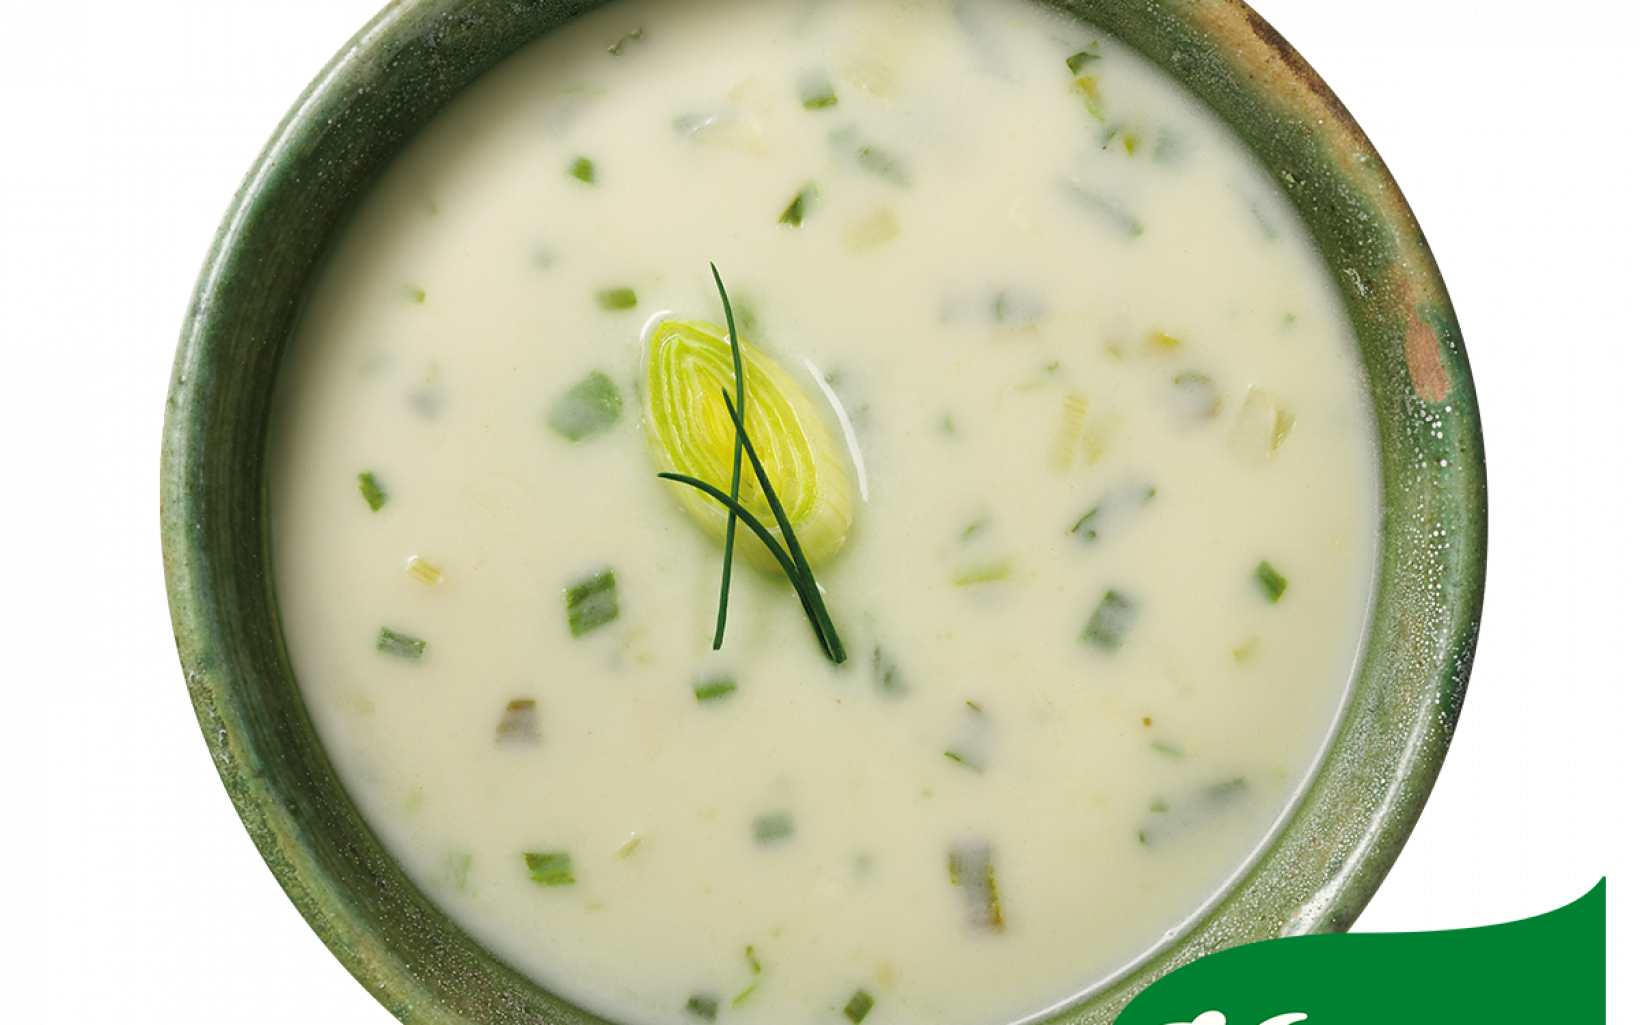 36386 Uk Knorr Classic Leek Soup With Logo Supp Image 1200x1200px 20203pm